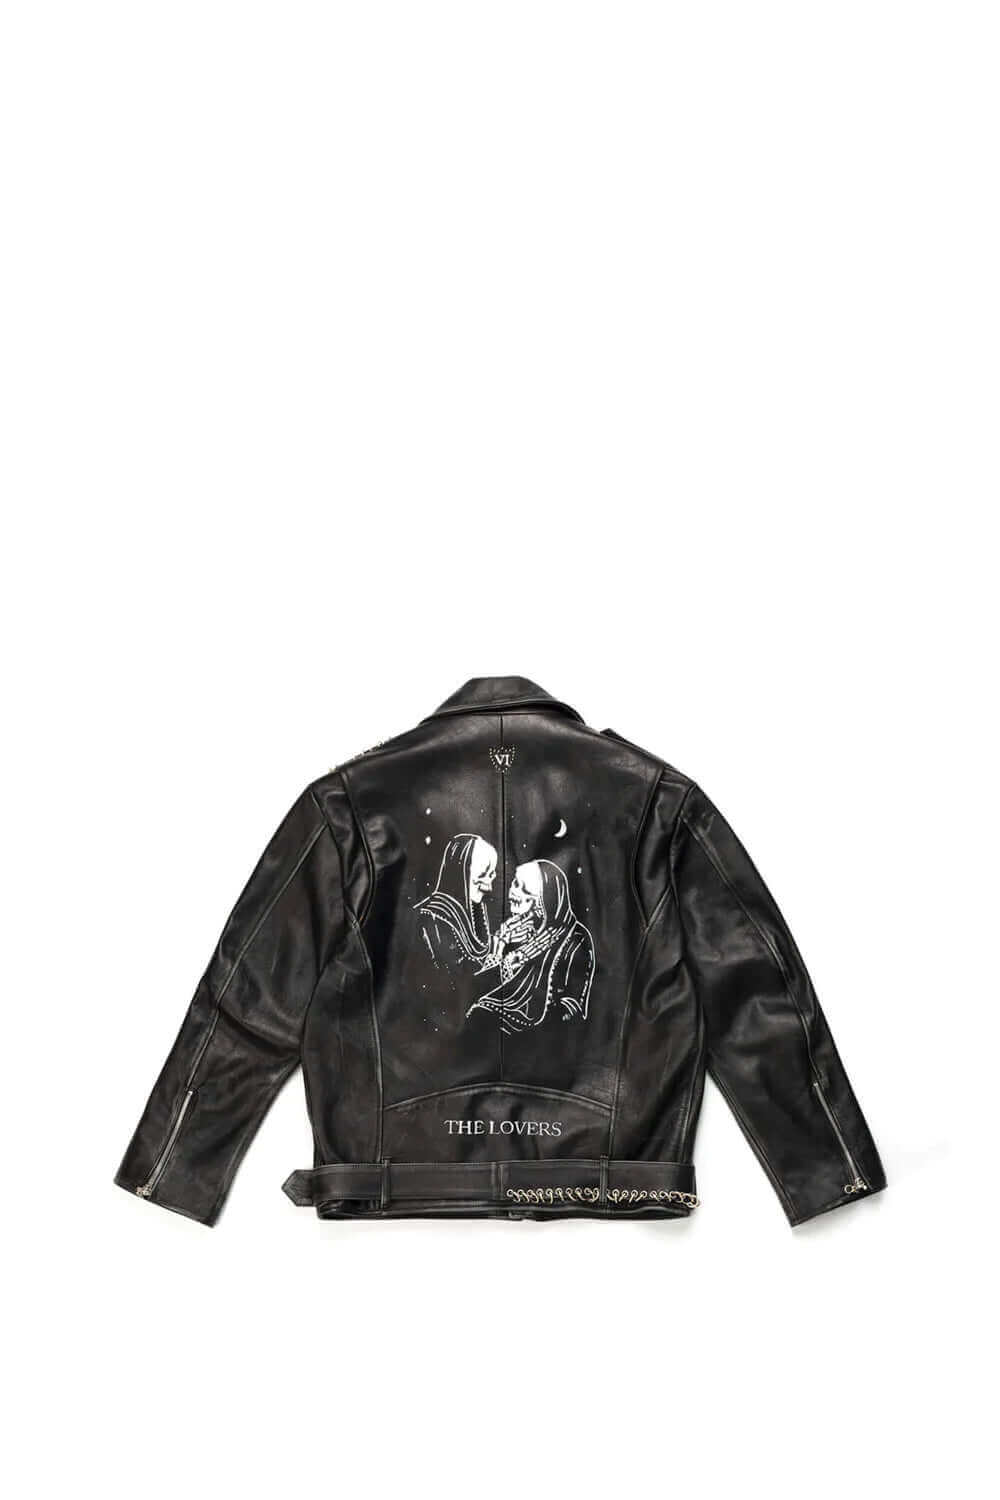 ALLEN SKULLS JACKET Black leather jacket printed on the back. Central zip closure. Side and frontal pockets with zip closure. 100% leather. Made in Italy. HTC LOS ANGELES